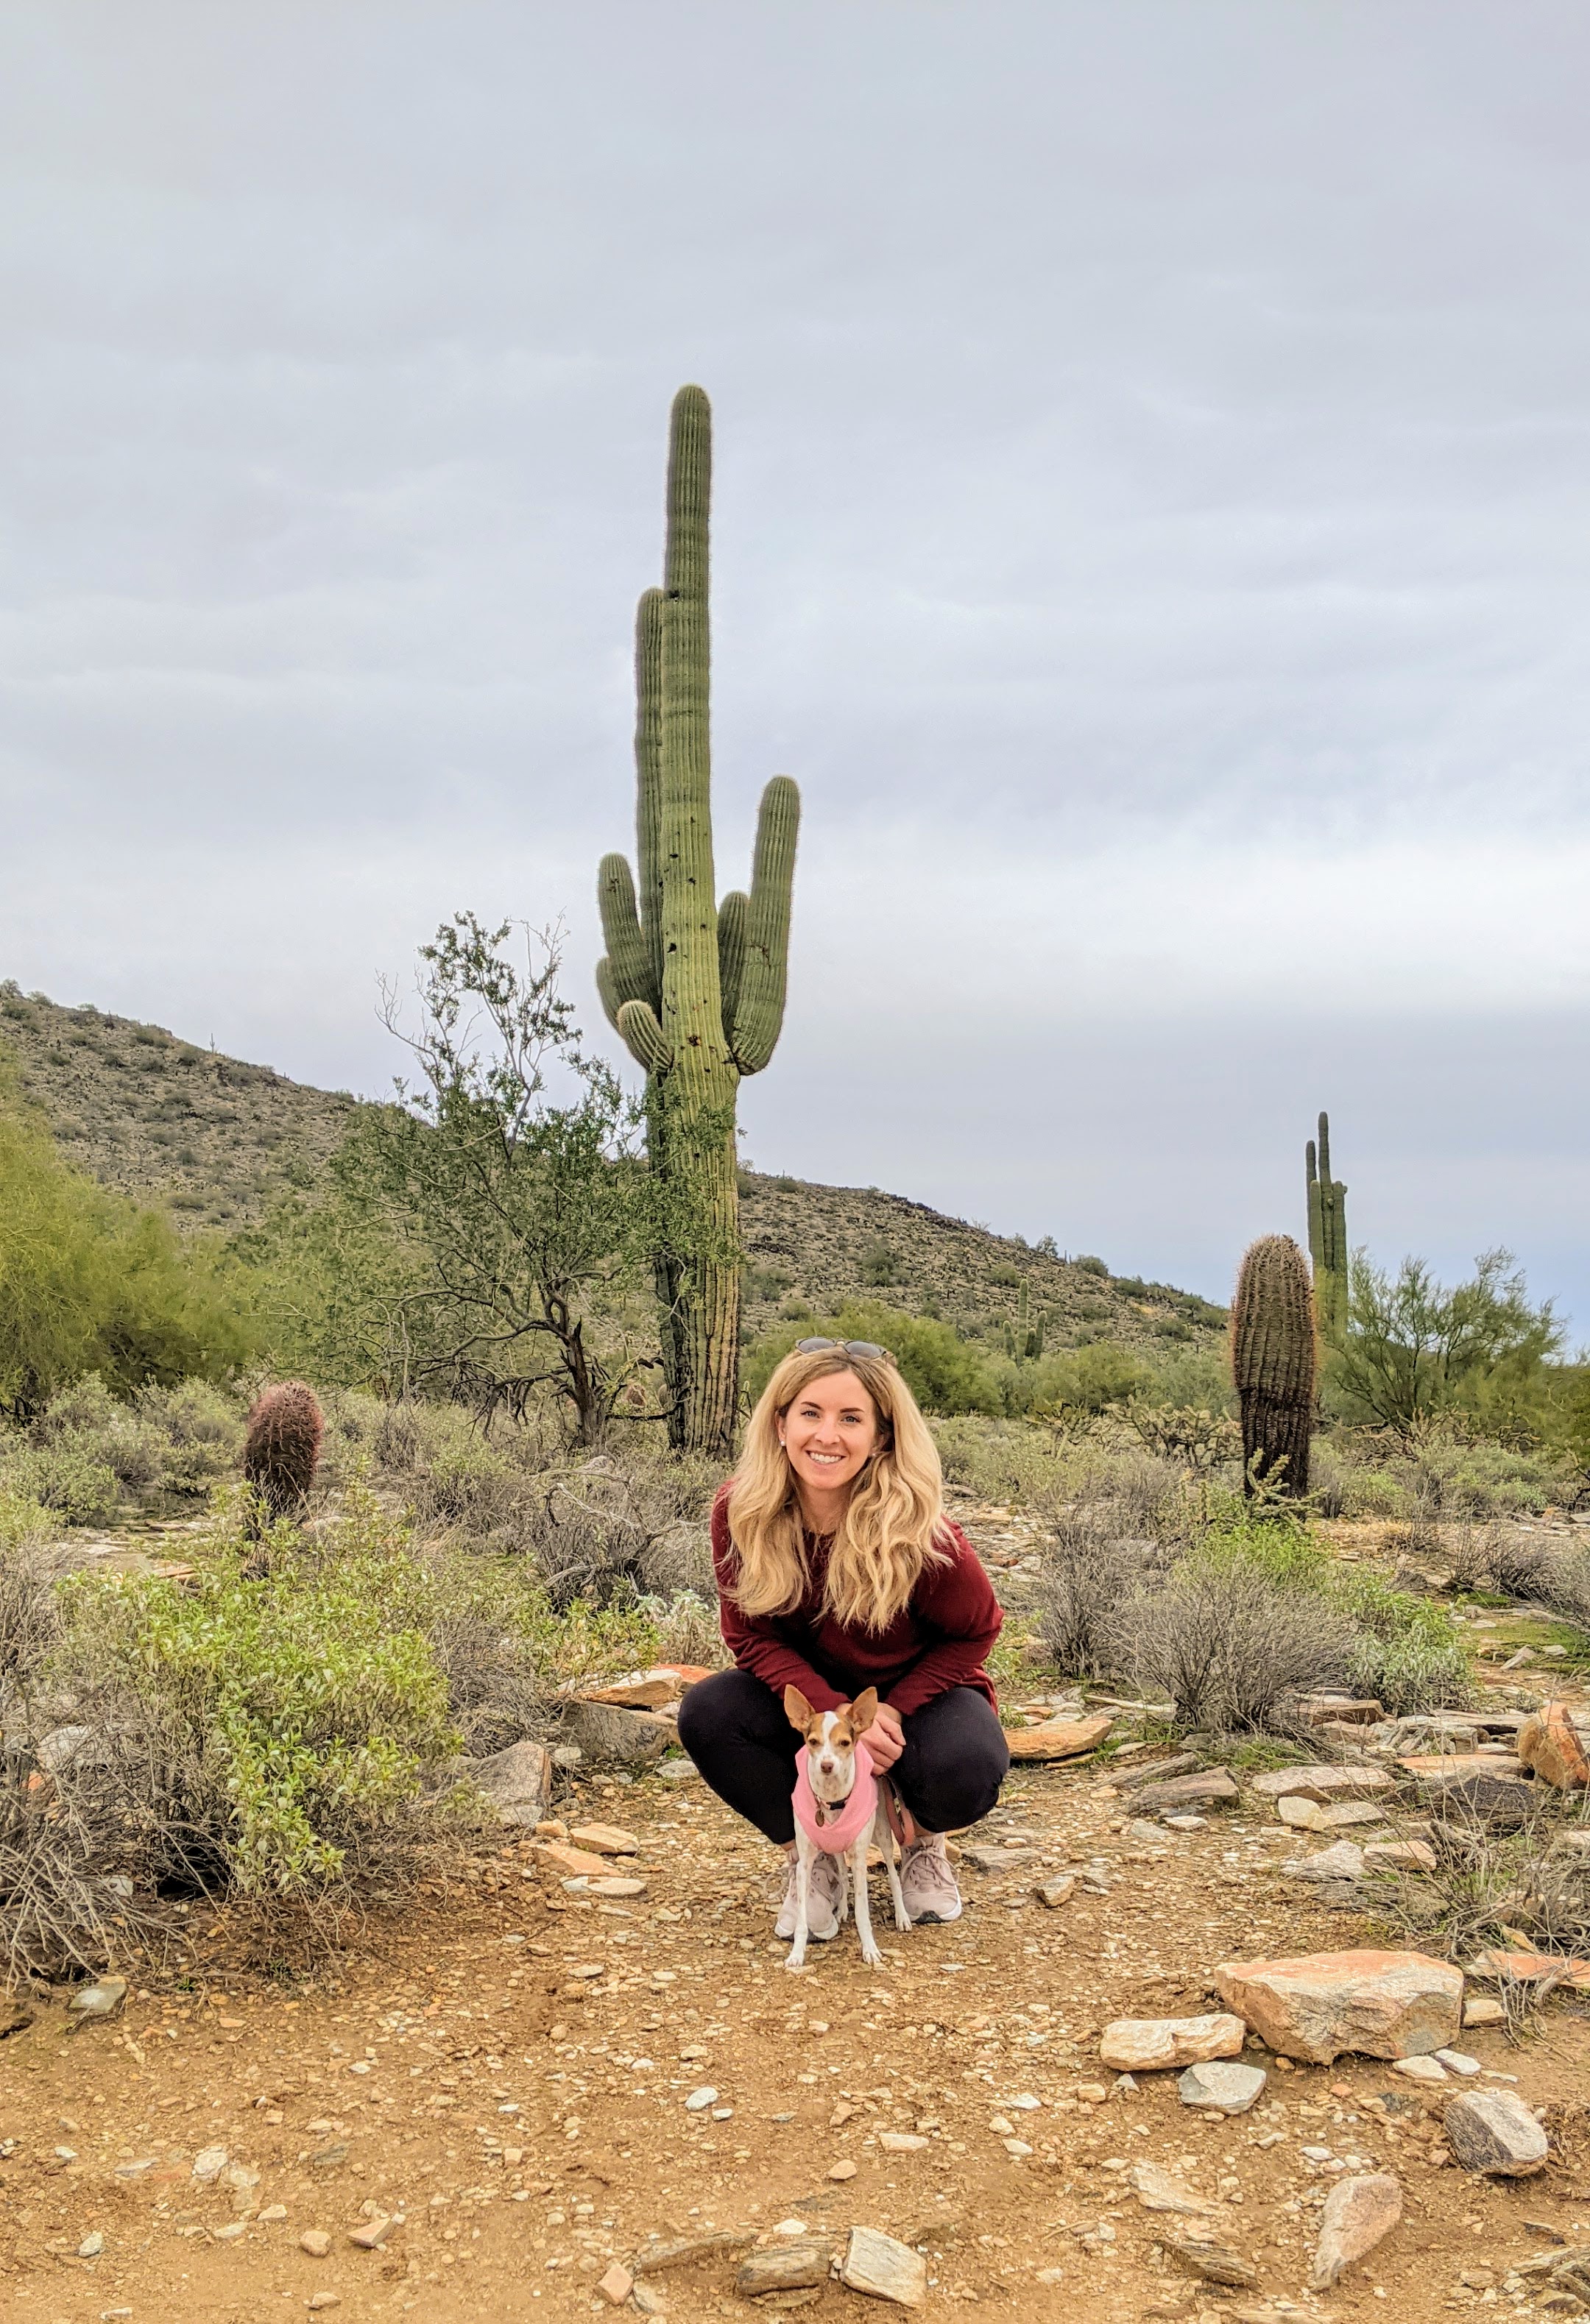 lady poses with her dog on a rocky trail in front of a large cactus